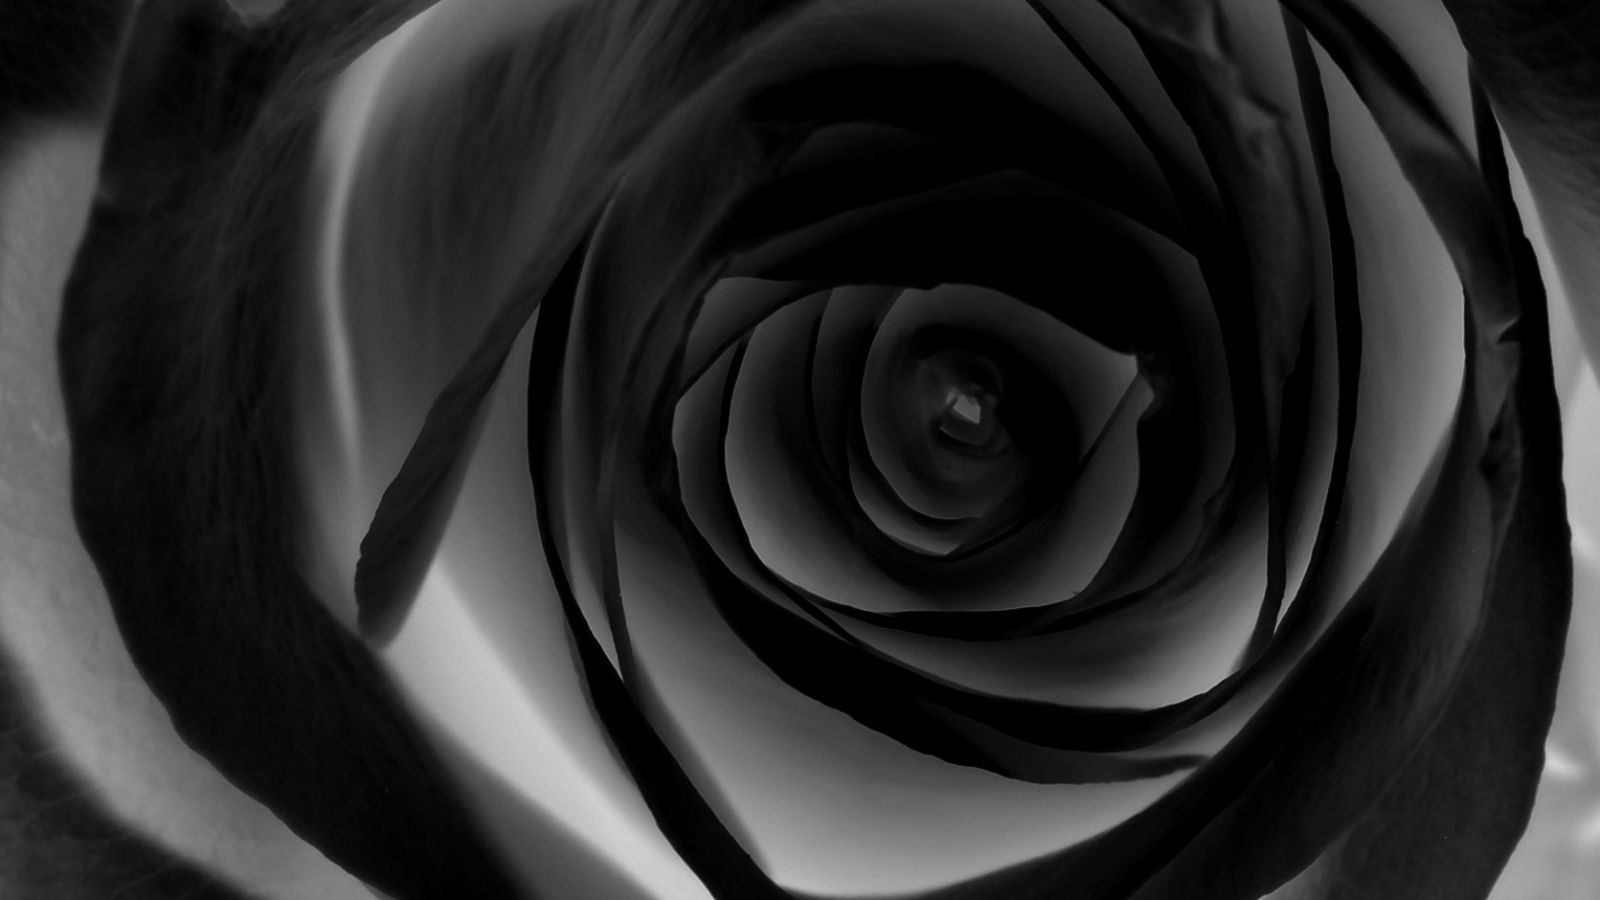 Free download Black rose wallpaper HD Tumblr For Walls for Mobile